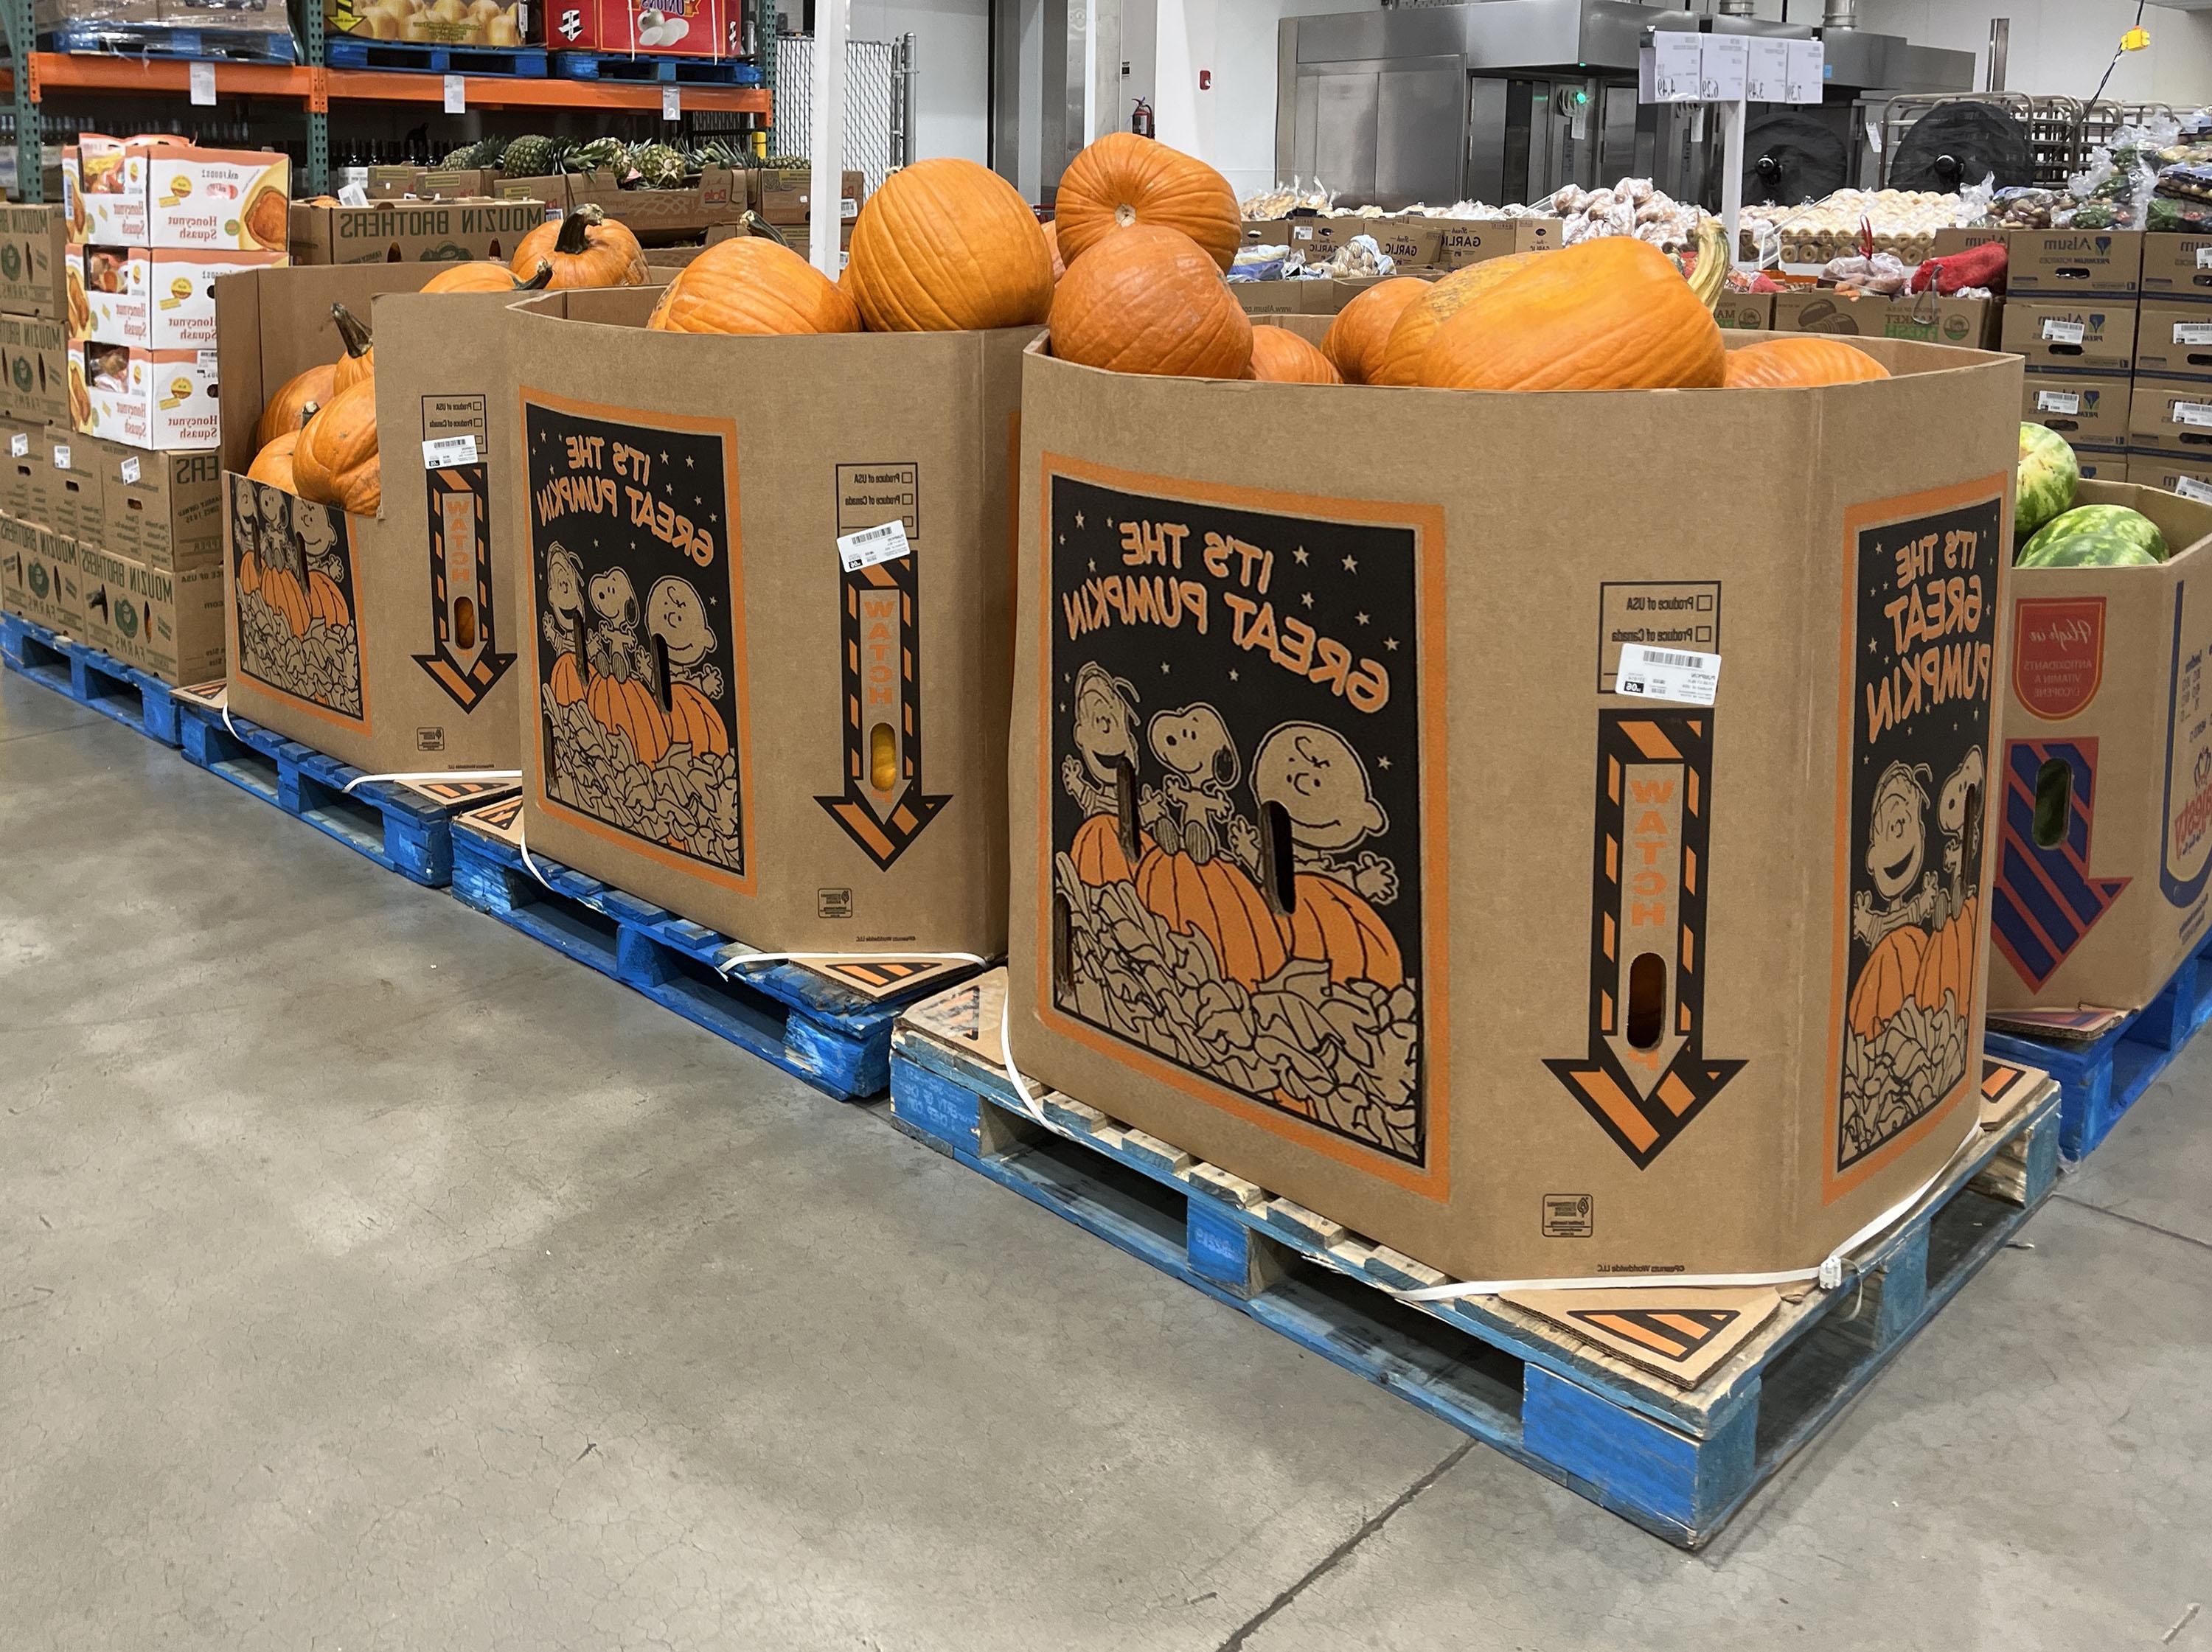 climabin with pumpkins